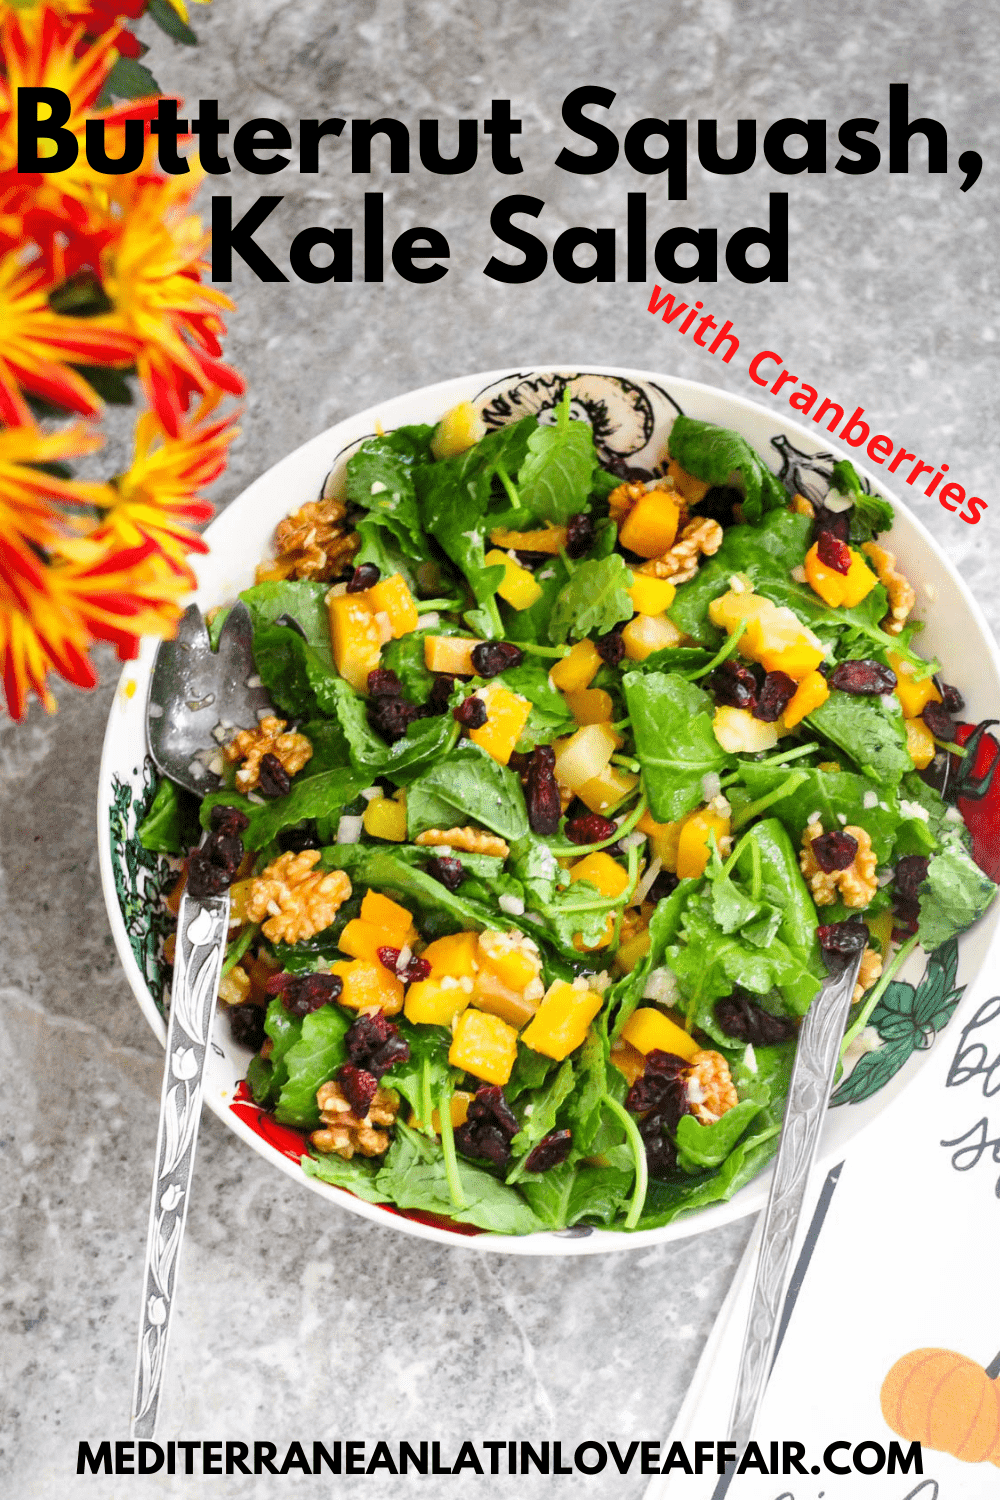 An image prepared for Pinterest, it shows the butternut squash salad on a bowl, a title bar on top and the website link on the bottom.